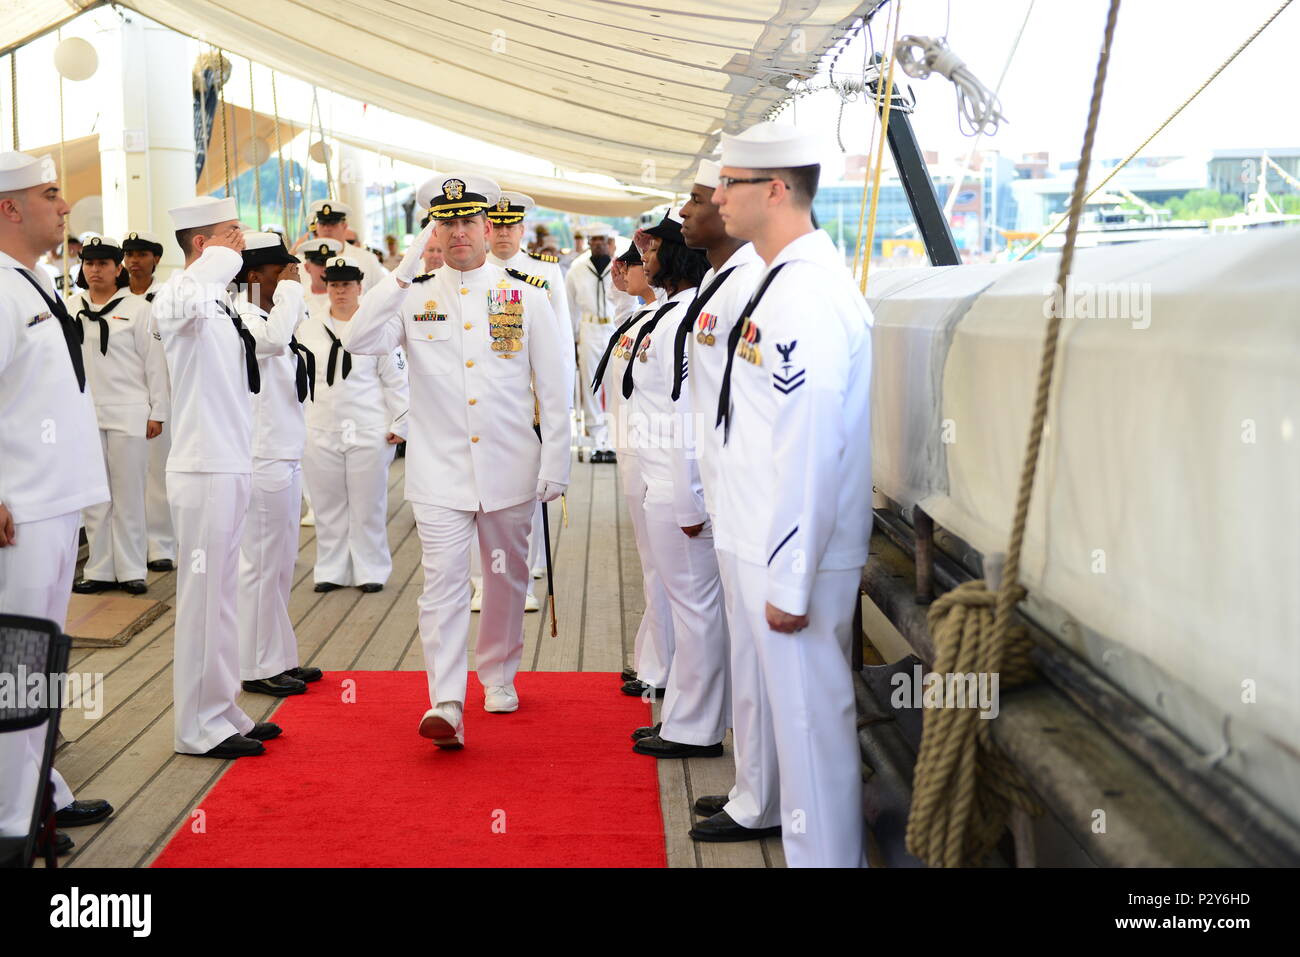 160806-N-DD899-201 BALTIMORE, Md. (Aug. 8, 2016) Cmdr.John B. Downes, center, passes through ceremonial sideboys as part of the official party for the Navy Operational Support Center (NOSC) Batimore change of command ceremony aboard USS Constellation in Baltimore Inner Harbor. Cmdr. Tasya Lacy relieved Downes as the NOSC Baltimore commanding officer. (U.S. Navy photo by Mass Communication Specialist 1st Class Sharay Bennett/Released) Stock Photo